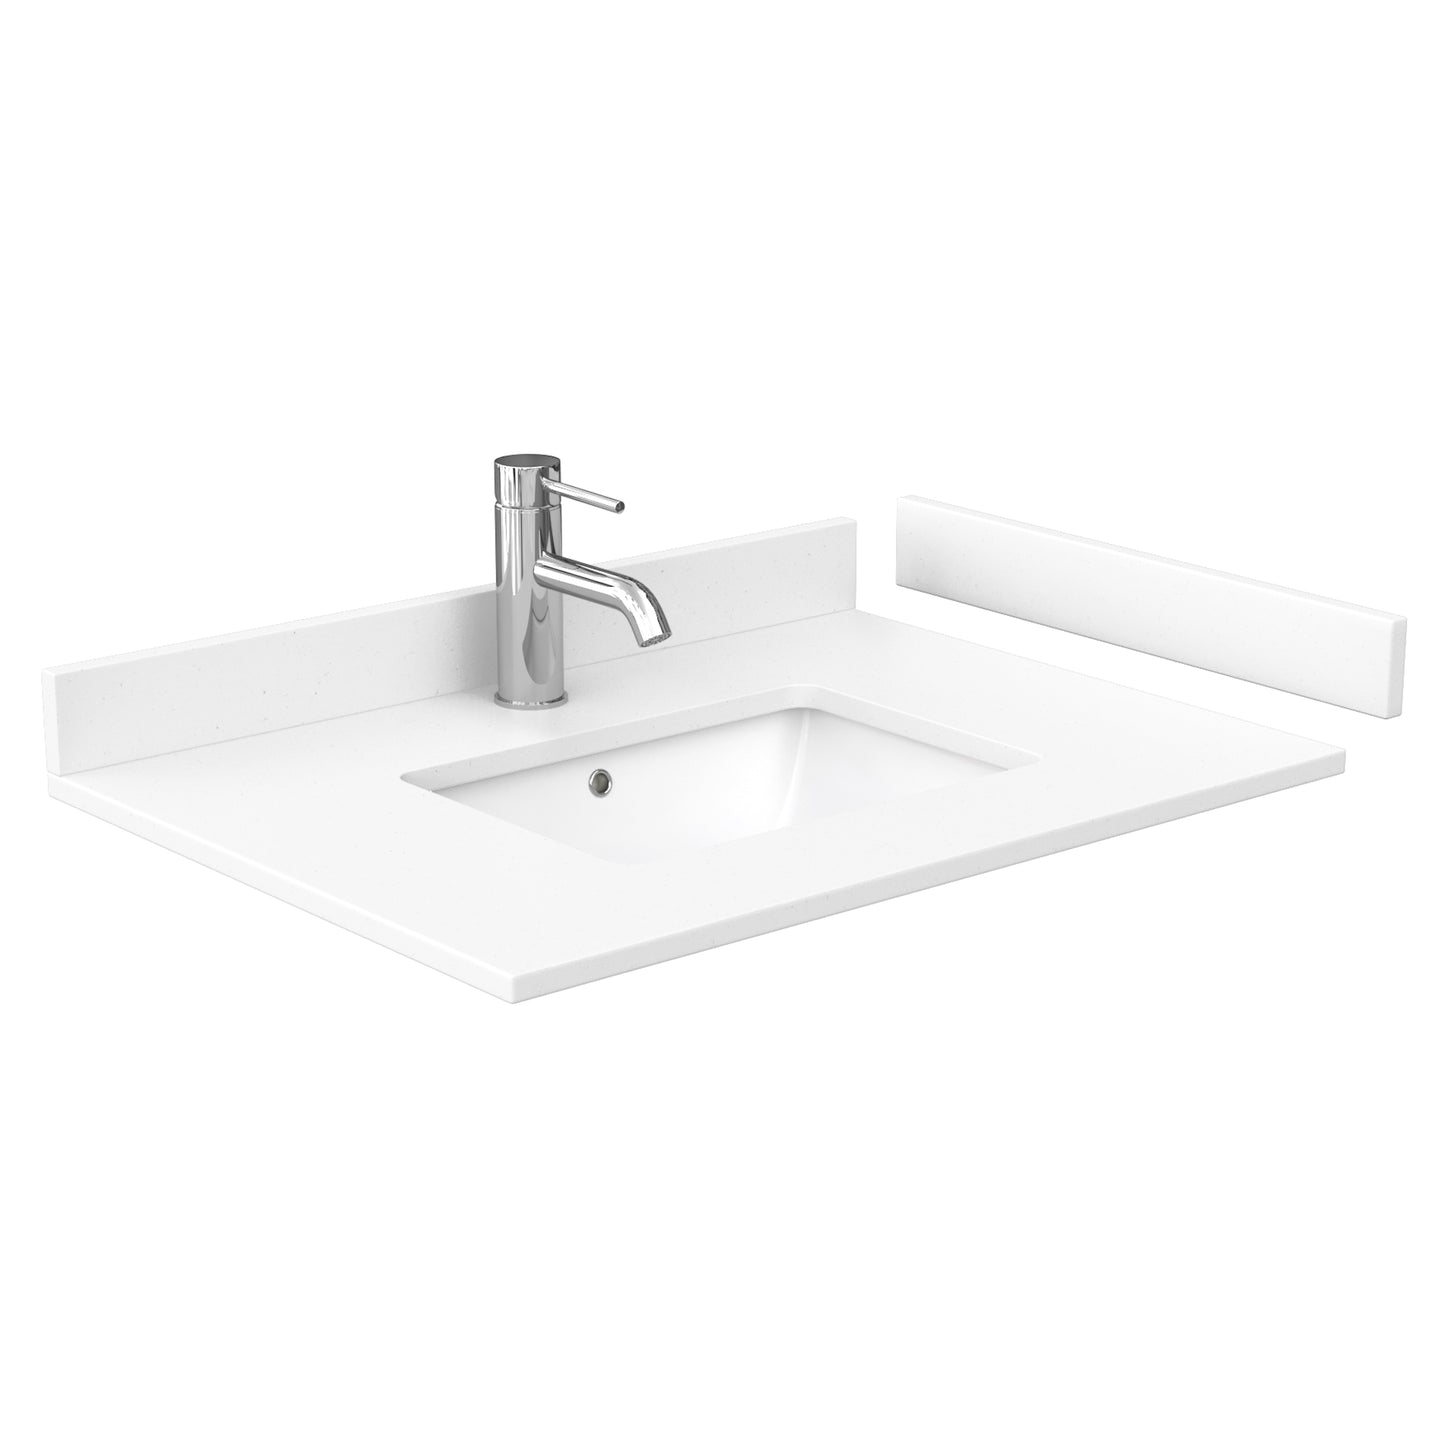 Wyndham Icon 30 Inch Single Bathroom Vanity in White with White Cultured Marble Countertop, Undermount Square Sink and Satin Bronze Trim - Luxe Bathroom Vanities